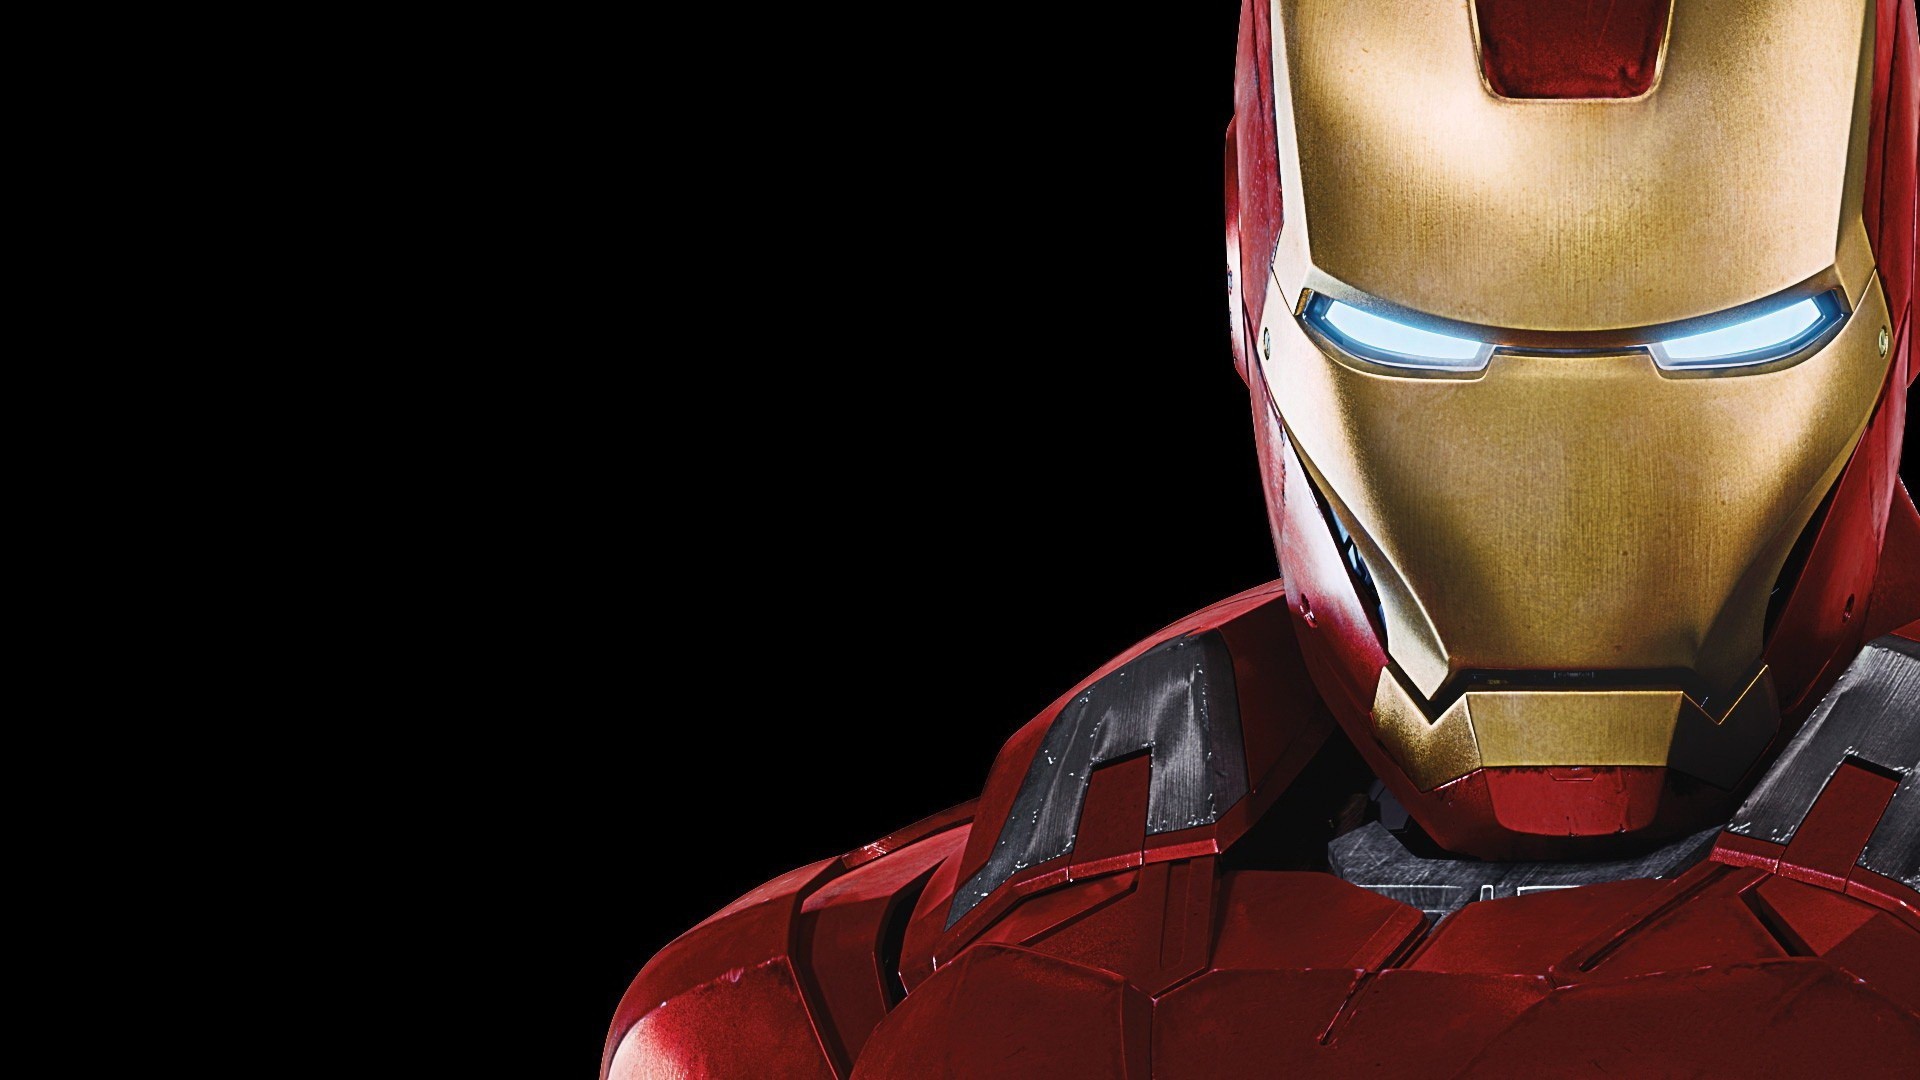 1920x1080 ironman hd wallpapers images HD Wallpapers Buzz 1863Ã1046 Iron Man Hd  Wallpaper (41